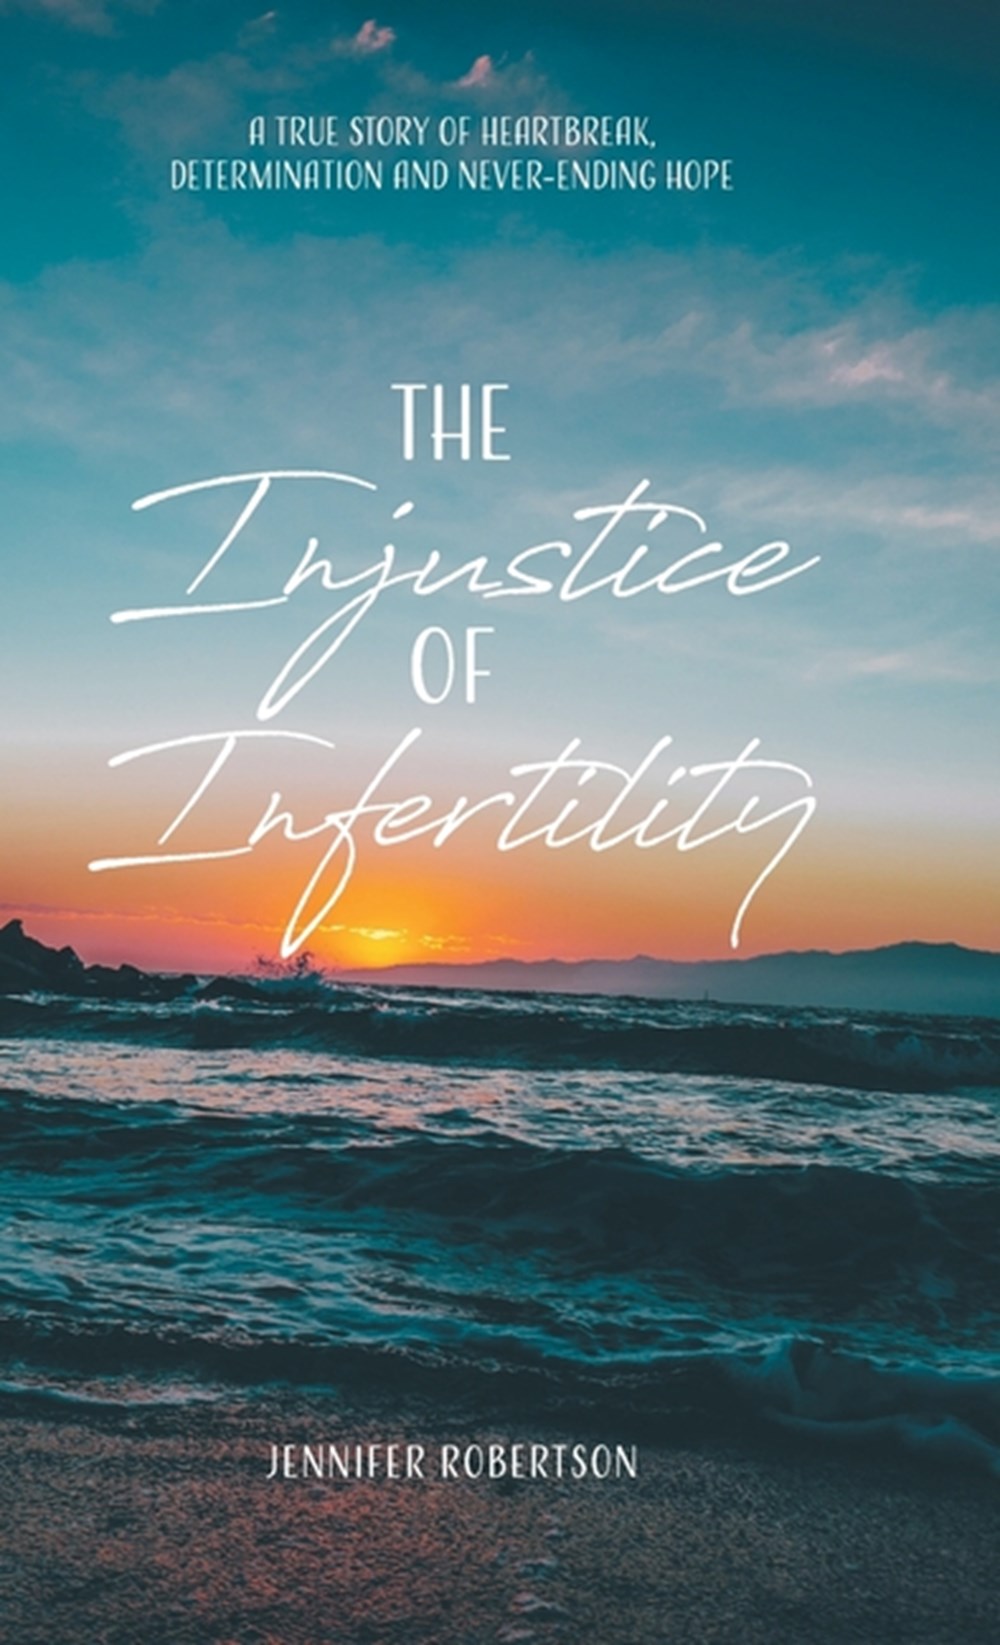 Injustice of Infertility: A True Story of Heartbreak, Determination and Never-Ending Hope